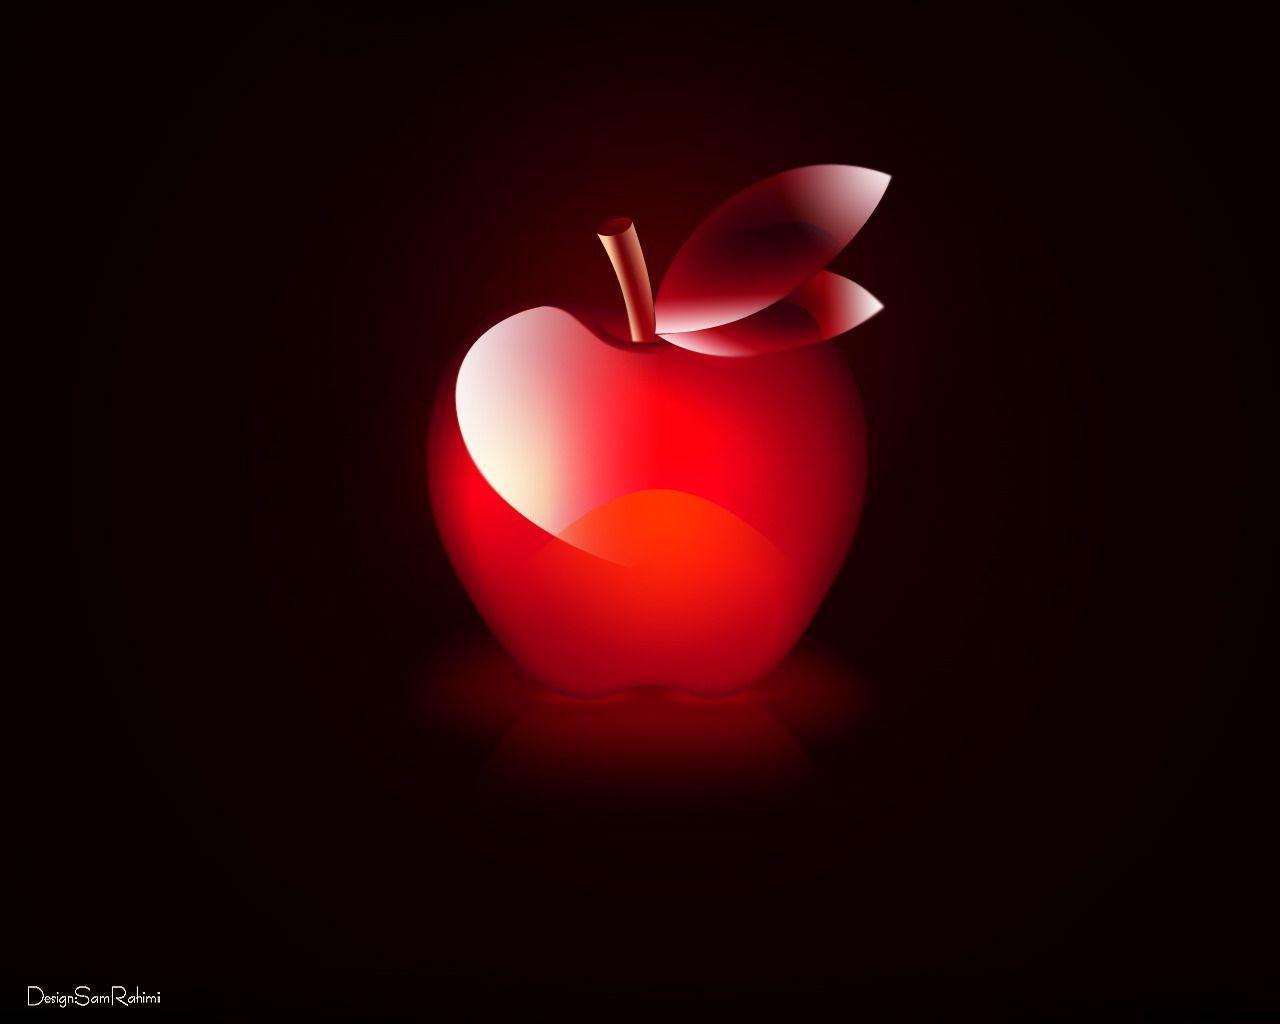 Free download Pics Photo Red Apples Wallpaper 1280x1024